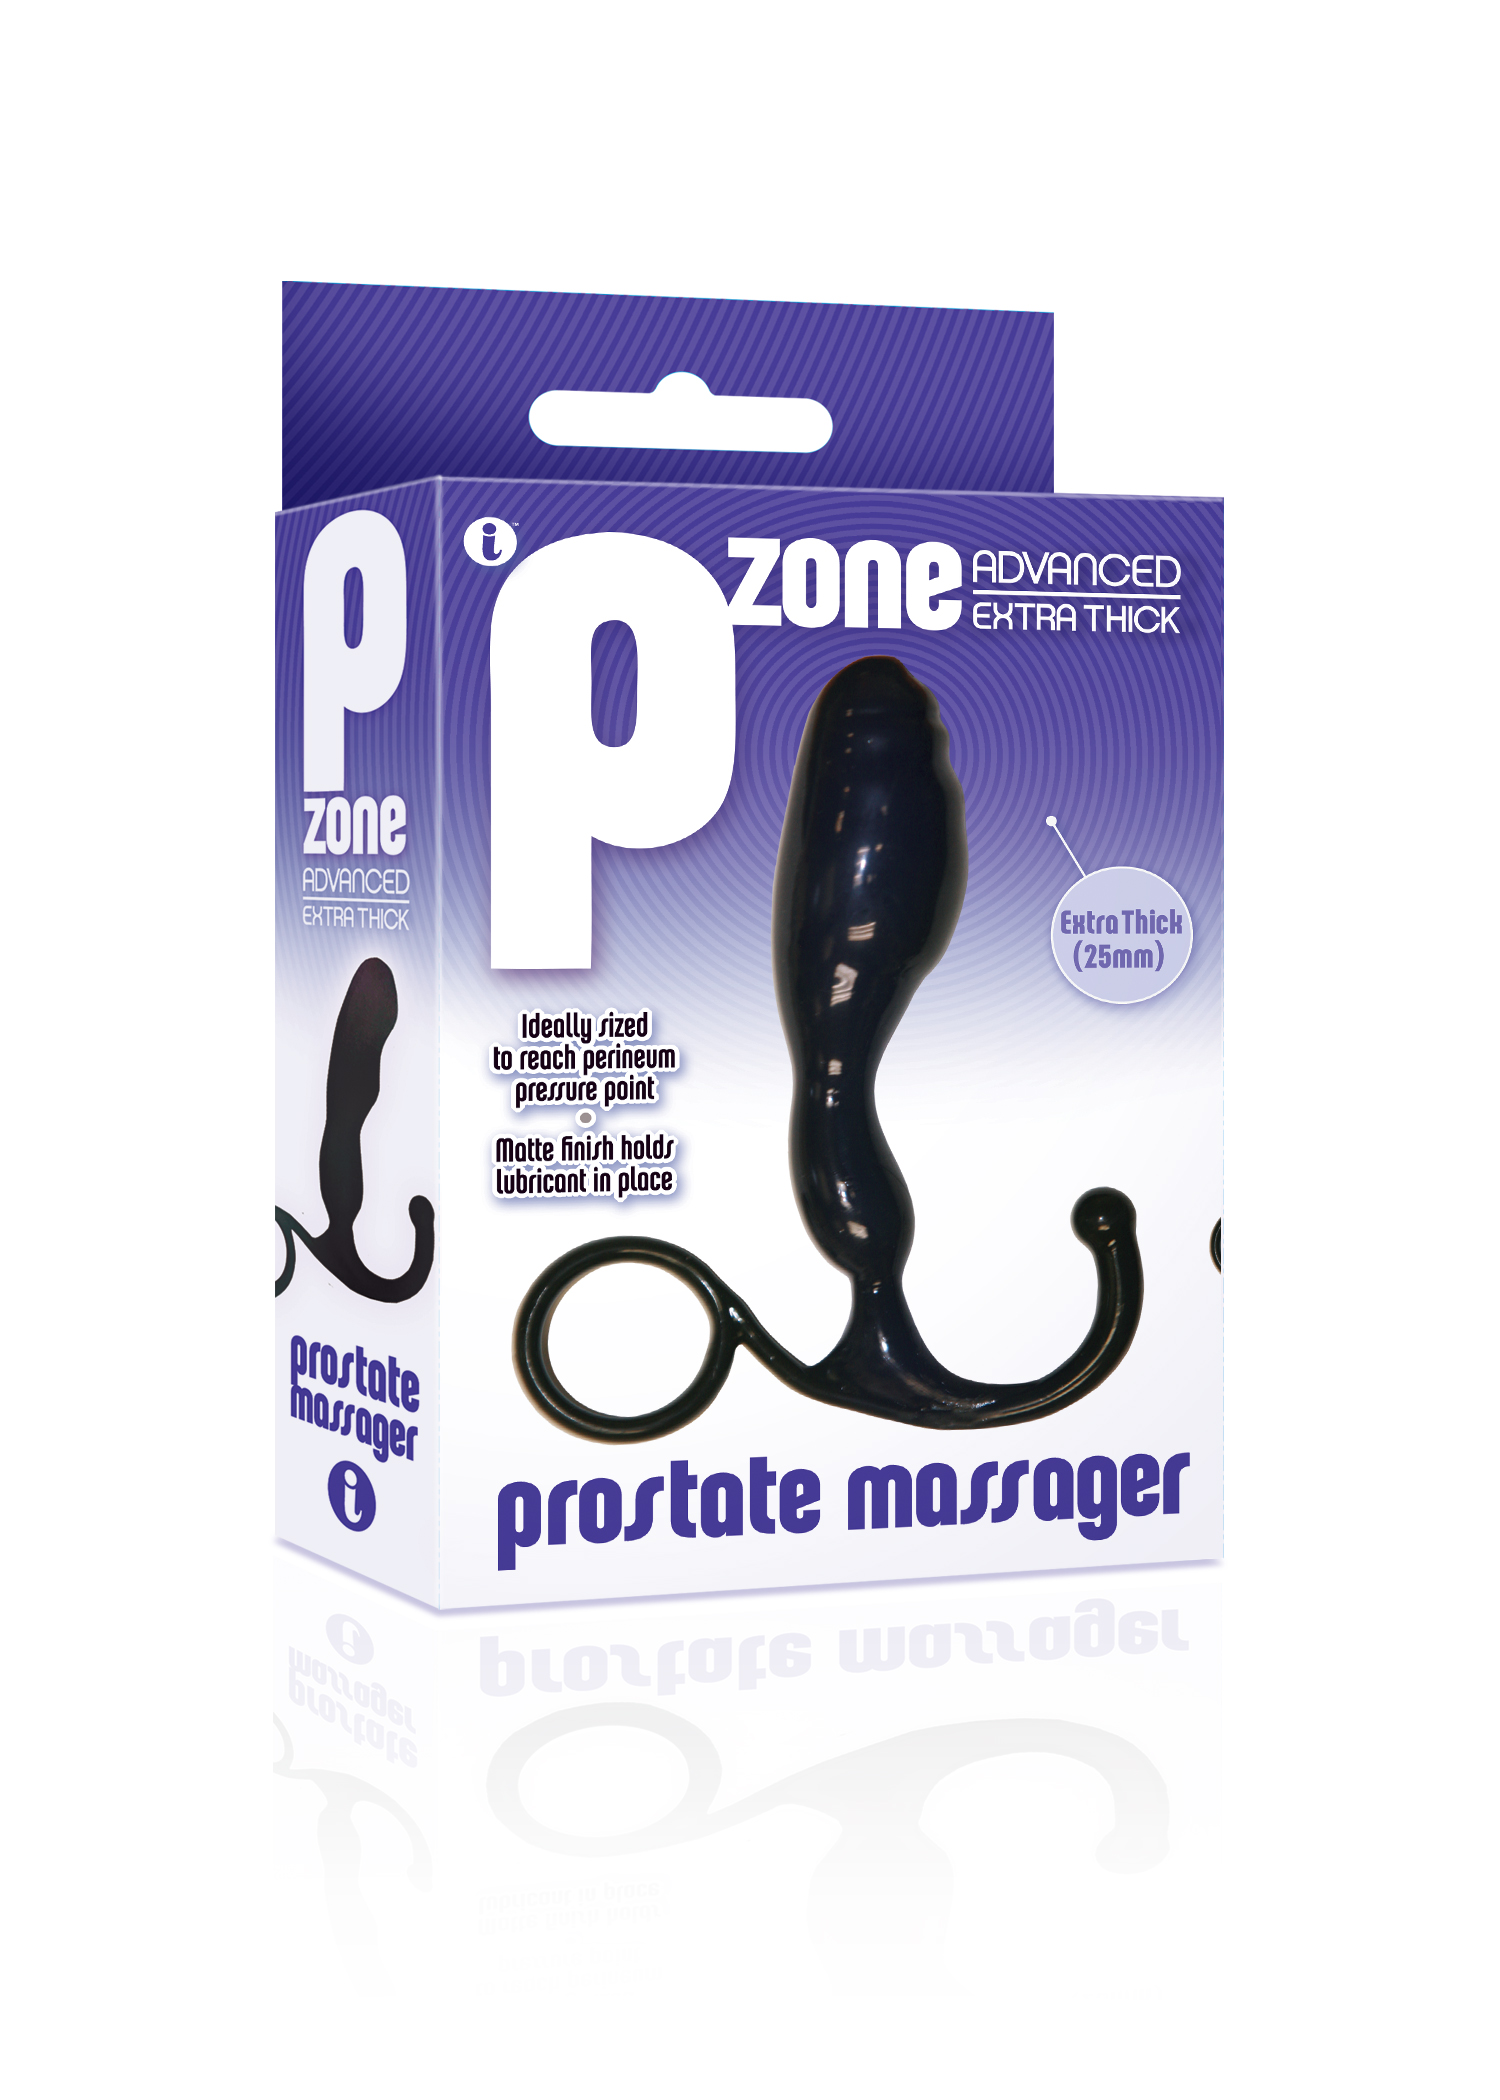 the s p zone advanced thick prostate massager 